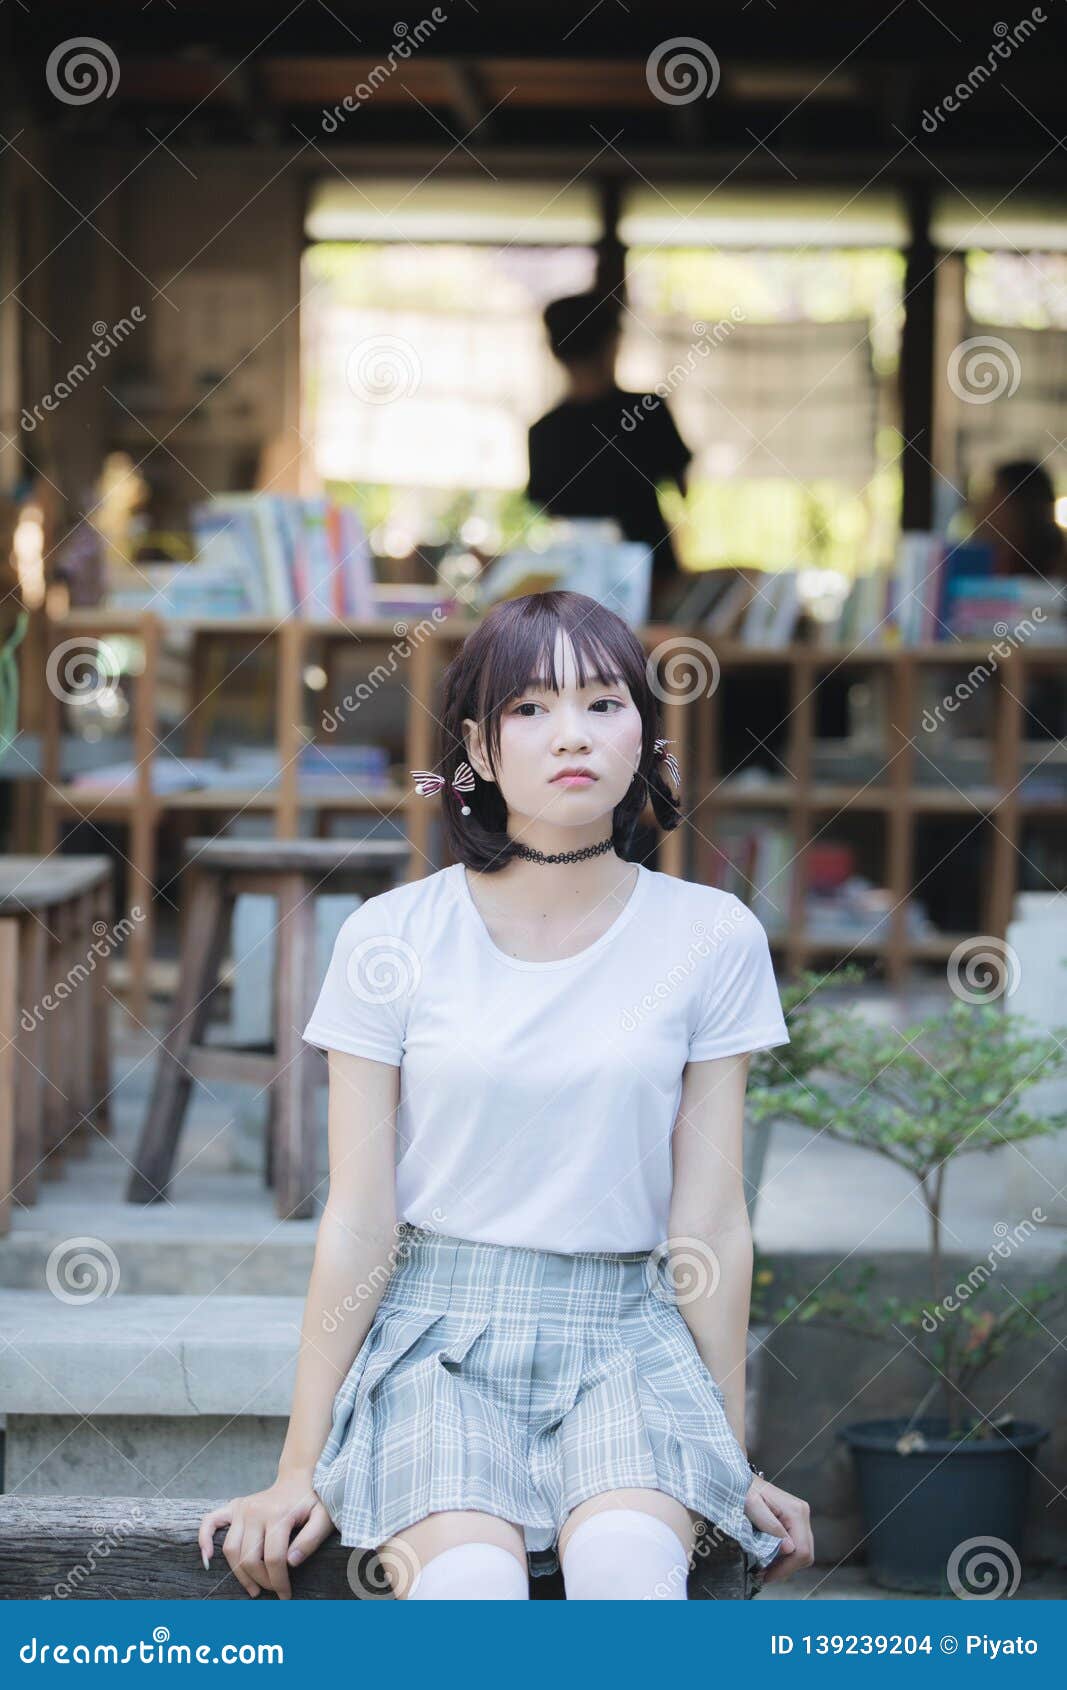 Portrait Of Asian Girl With White Shirt And Skirt Looking In Outdoor Nature Vintage Film Style